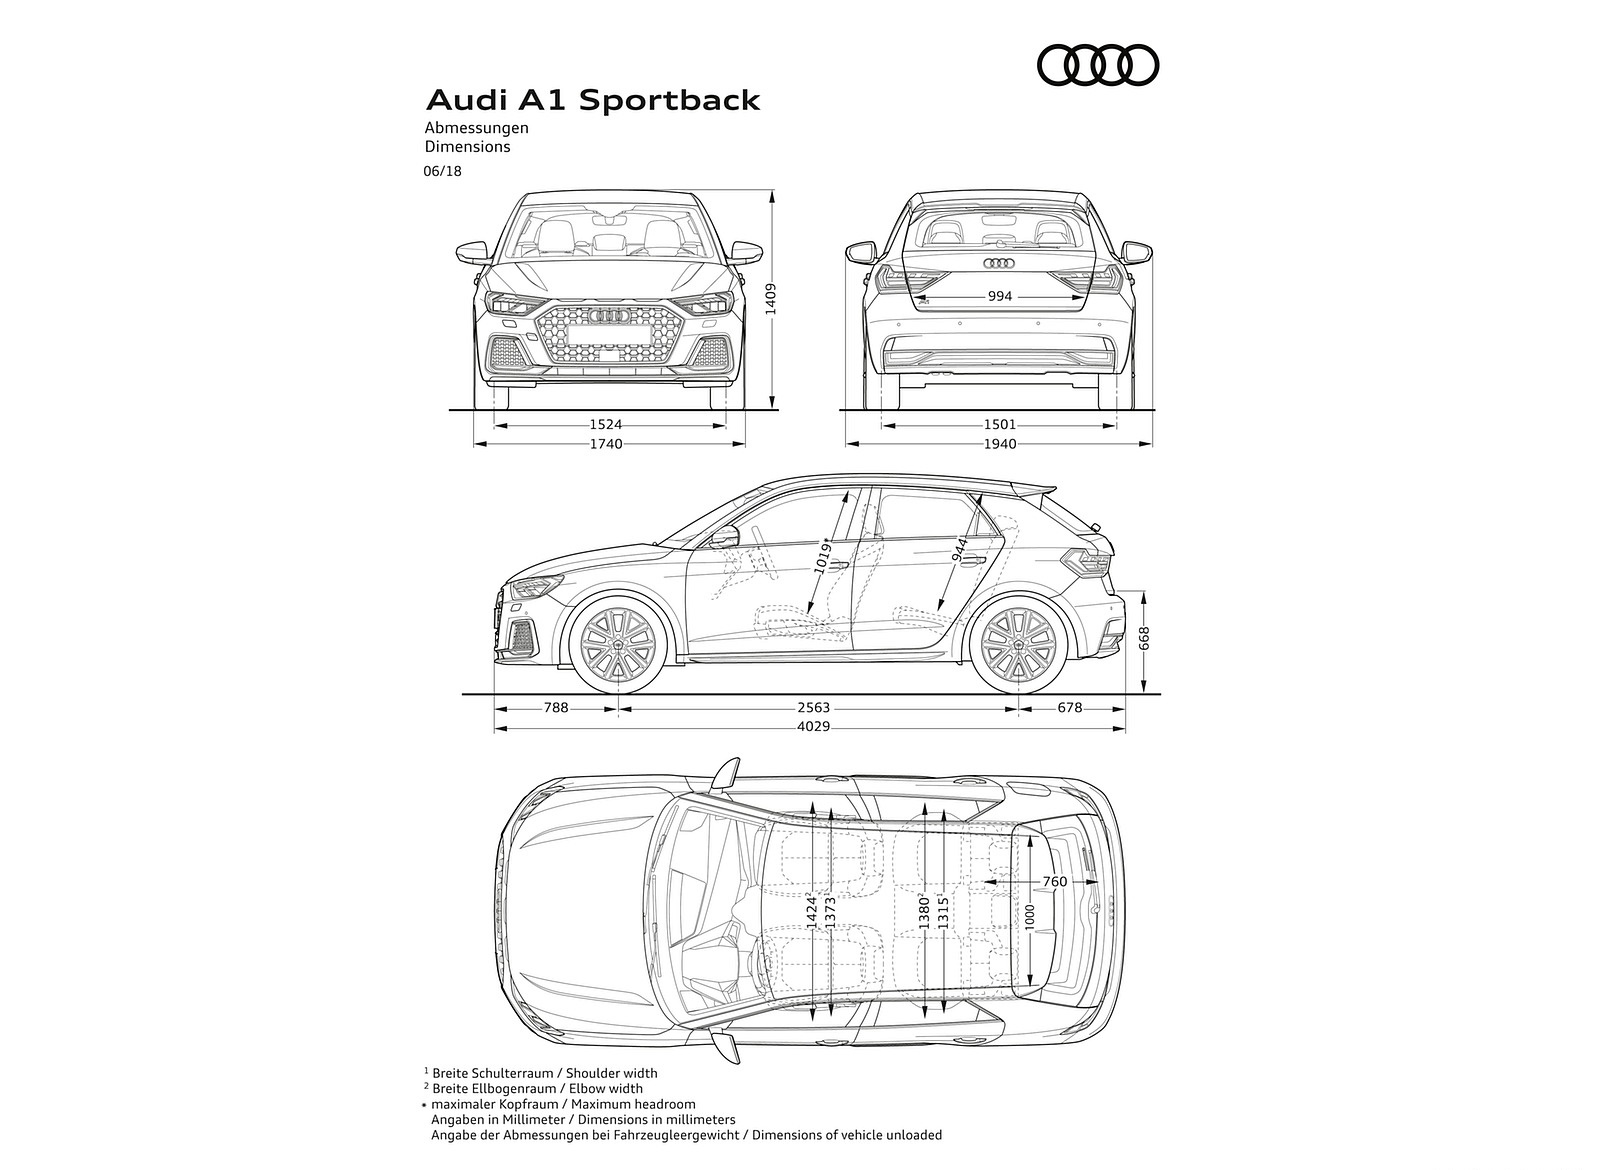 2019 Audi A1 Sportback Dimensions Wallpapers #31 of 31